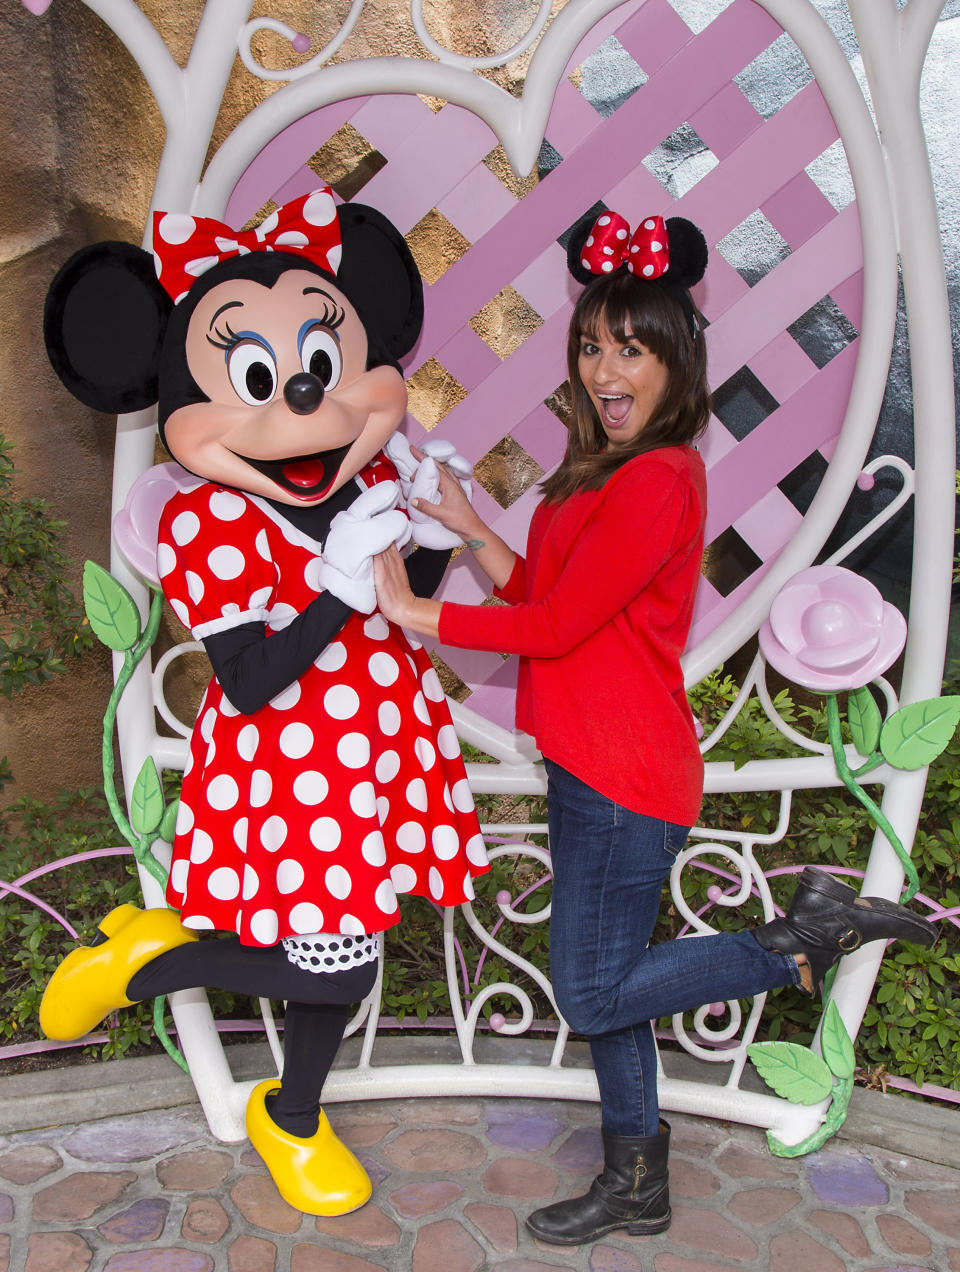 <p>ANAHEIM, CA - MAY 14: Lea Michele poses with Minnie Mouse in Mickey's Toontown May 14, 2015 at Disneyland park in Anaheim, California. (Photo by Paul Hiffmeyer/Disneyland Parks via Getty Images)</p>